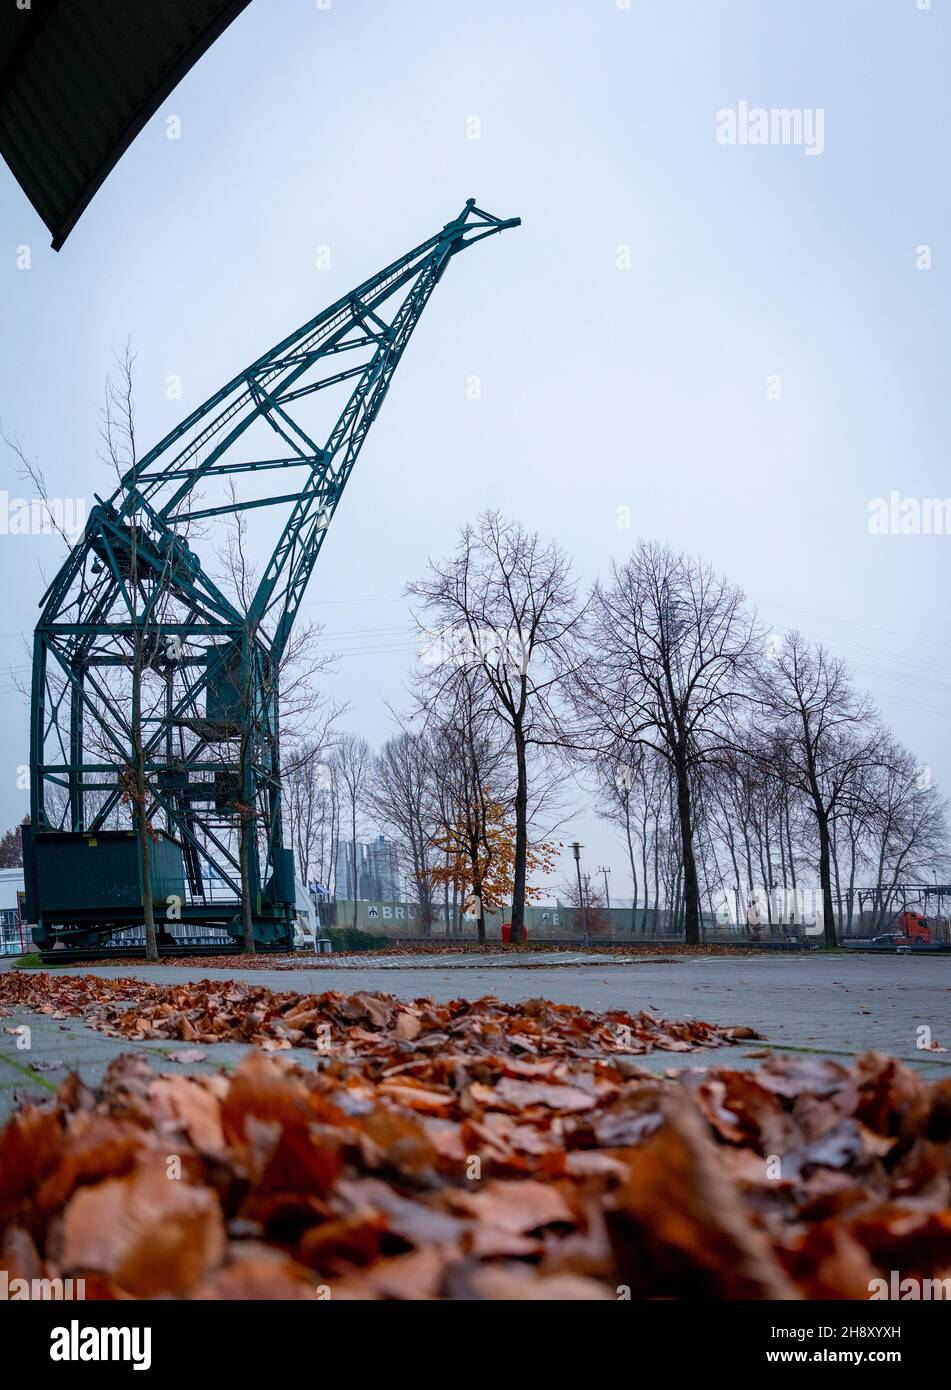 Present view of the old crane of the Meyer shipyard in Papenburg, Germany Stock Photo